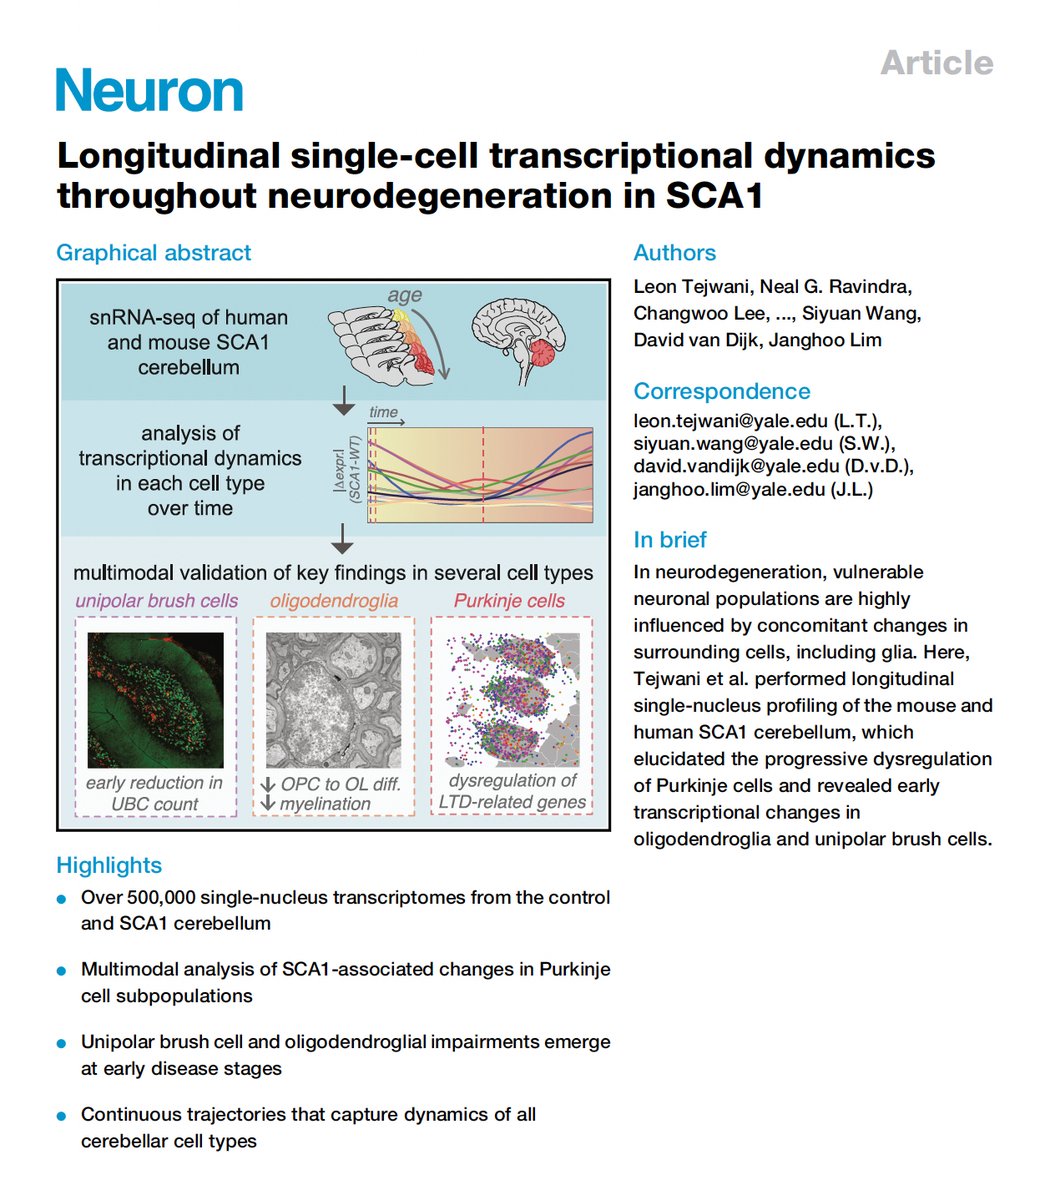 This year, we are thankful for the immense work that @LeonTejwani, @chchrislee, and others in the lab contributed to our latest publication out today in @NeuroCellPress 👏🎉 Thanks to our collaborators @SStevenWang & @david_van_dijk! @YaleNeuro @Yale_INP @YaleRNA @YaleGenetics